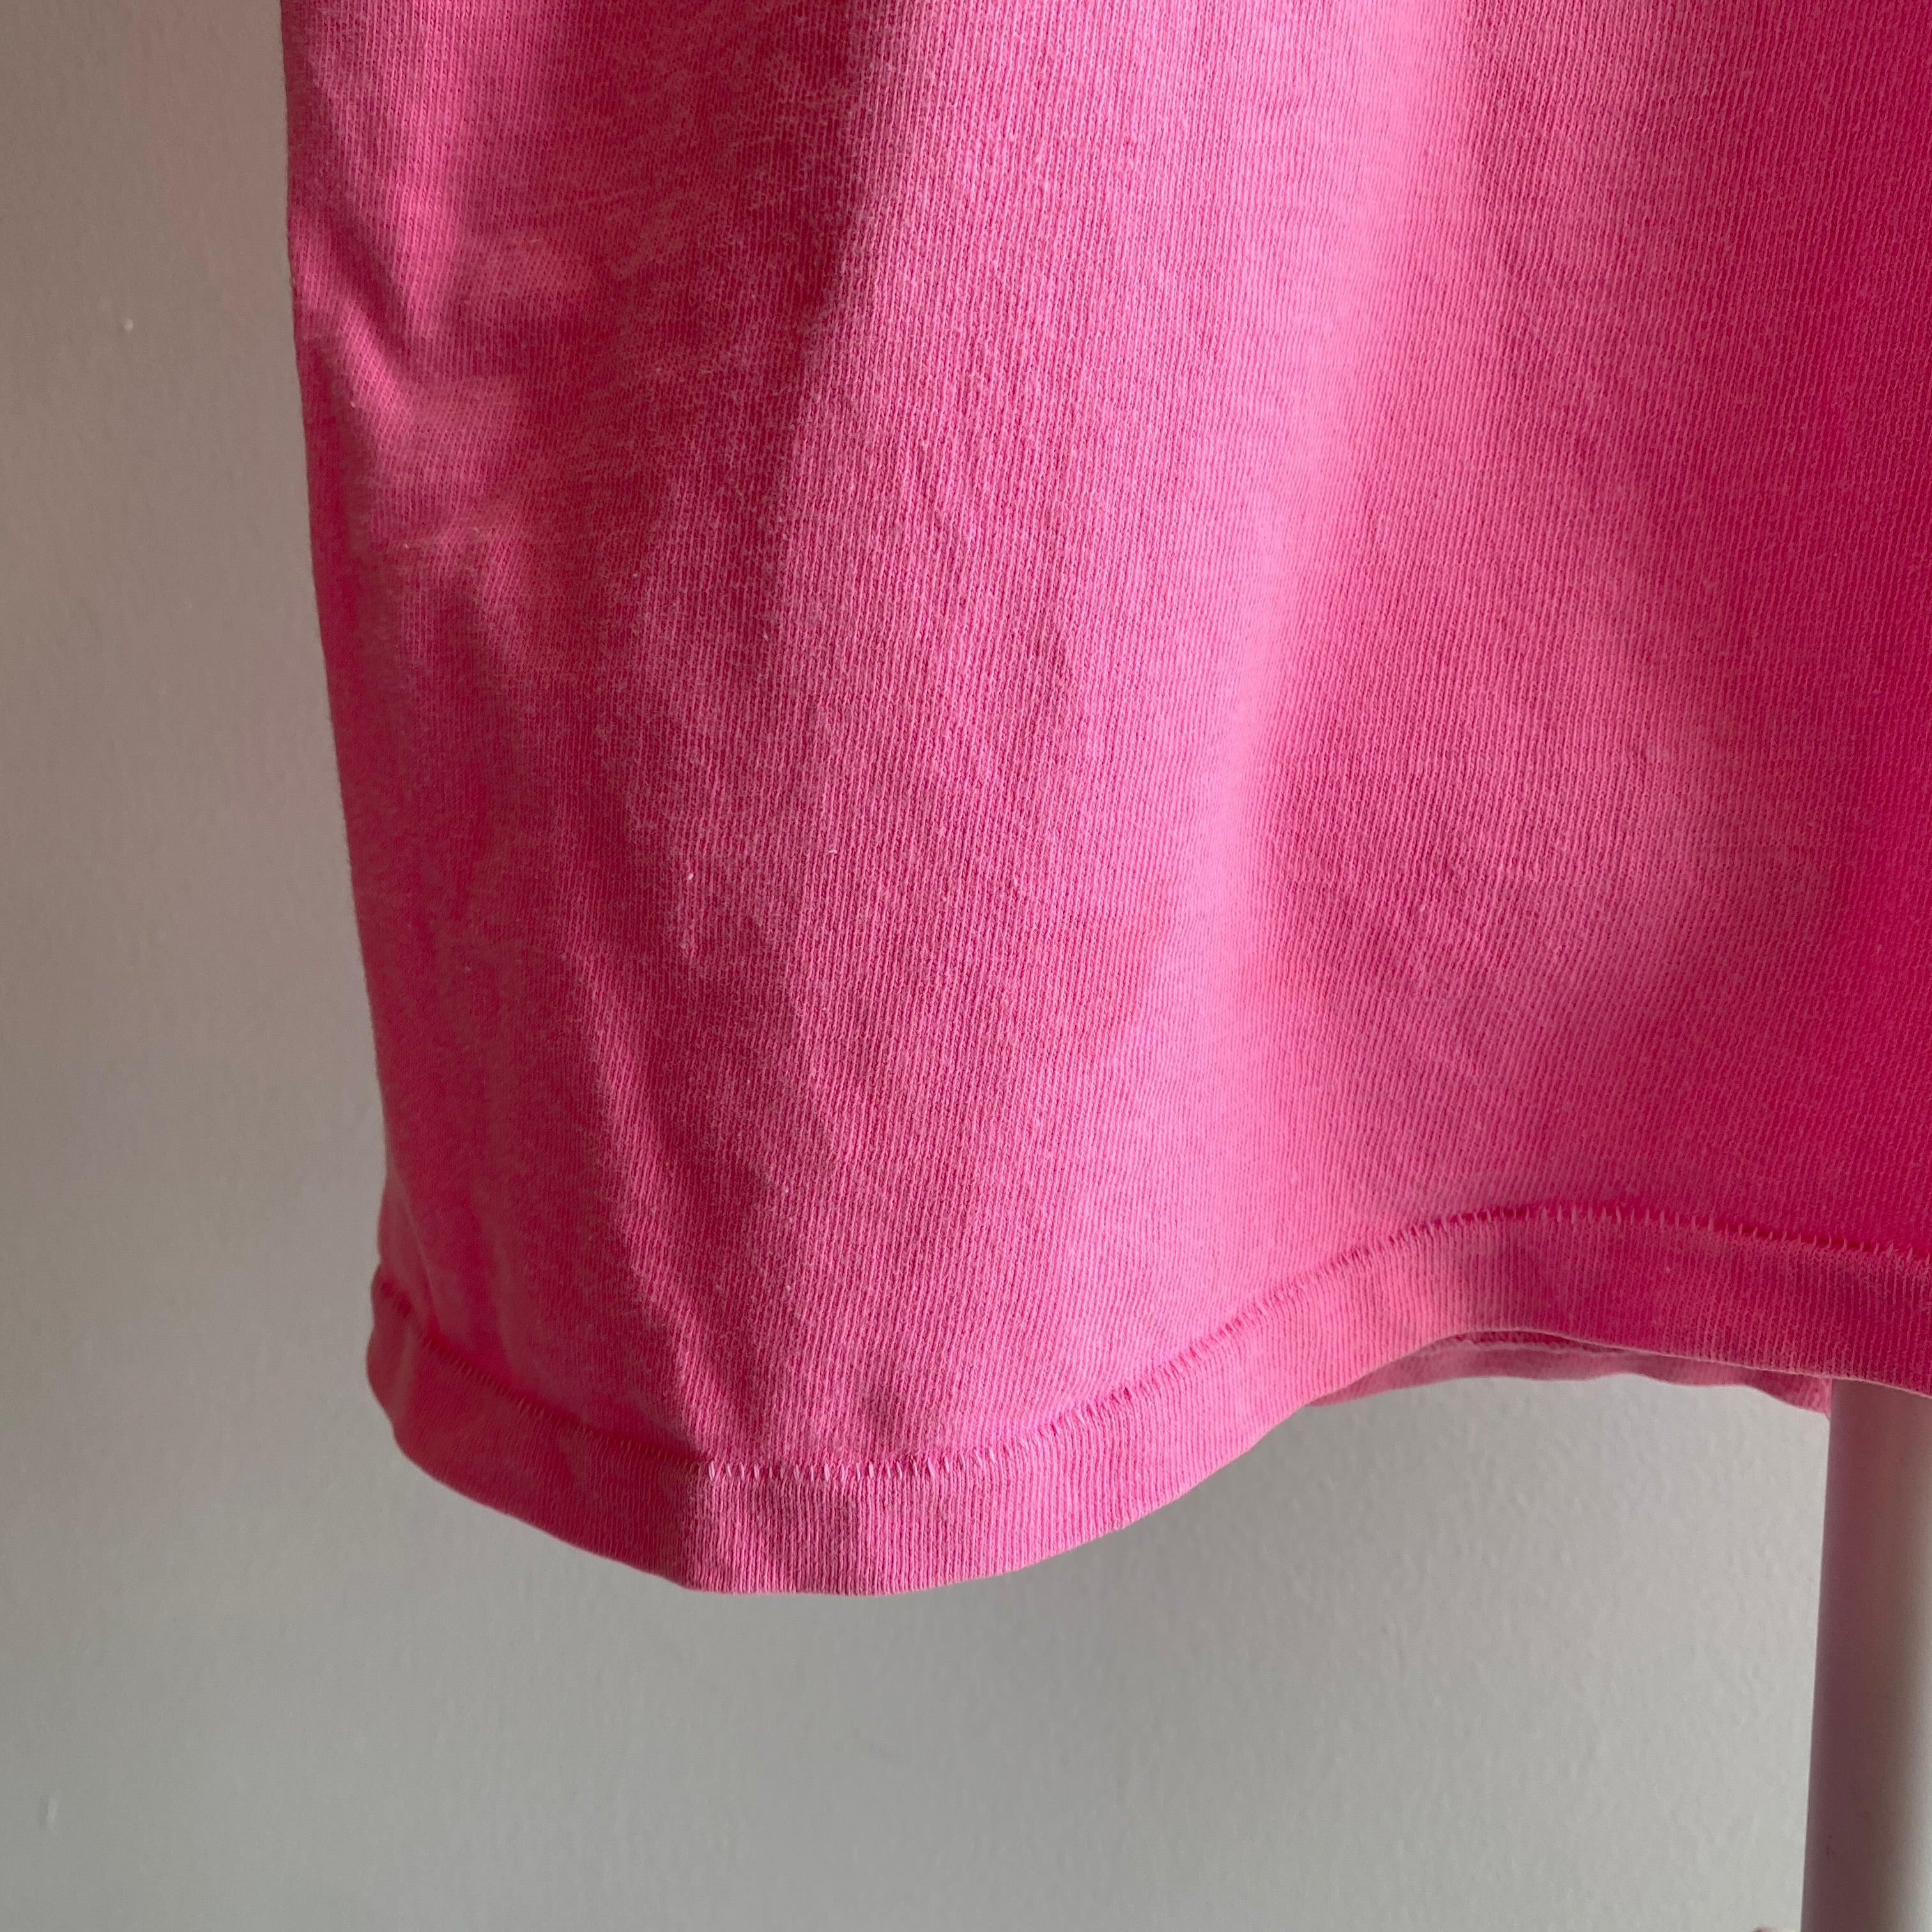 1980/90s Heavy Cotton HOT faded Pink Blank T-Shirt